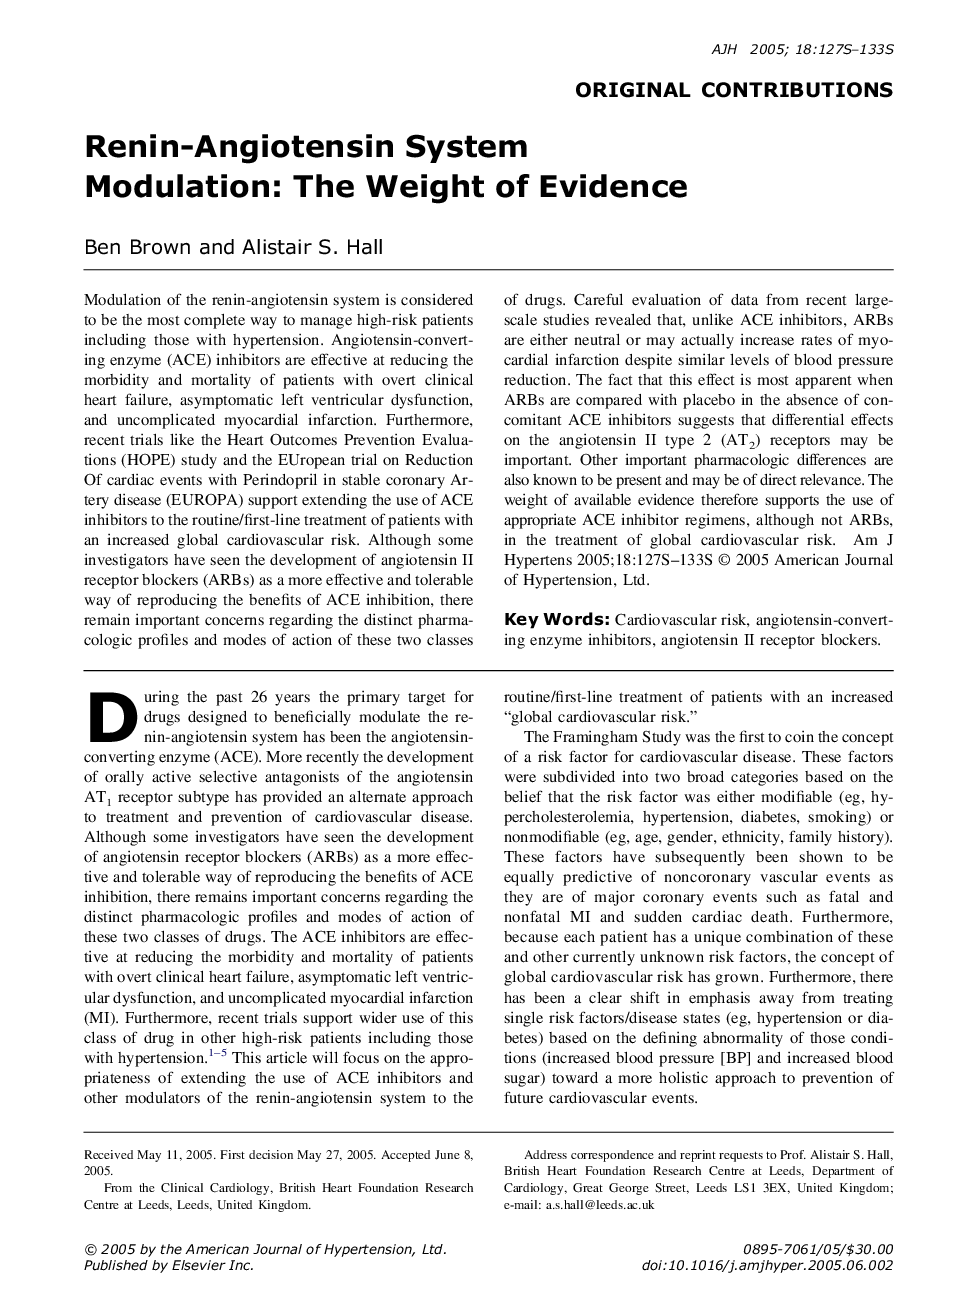 Renin-Angiotensin System Modulation: The Weight of Evidence